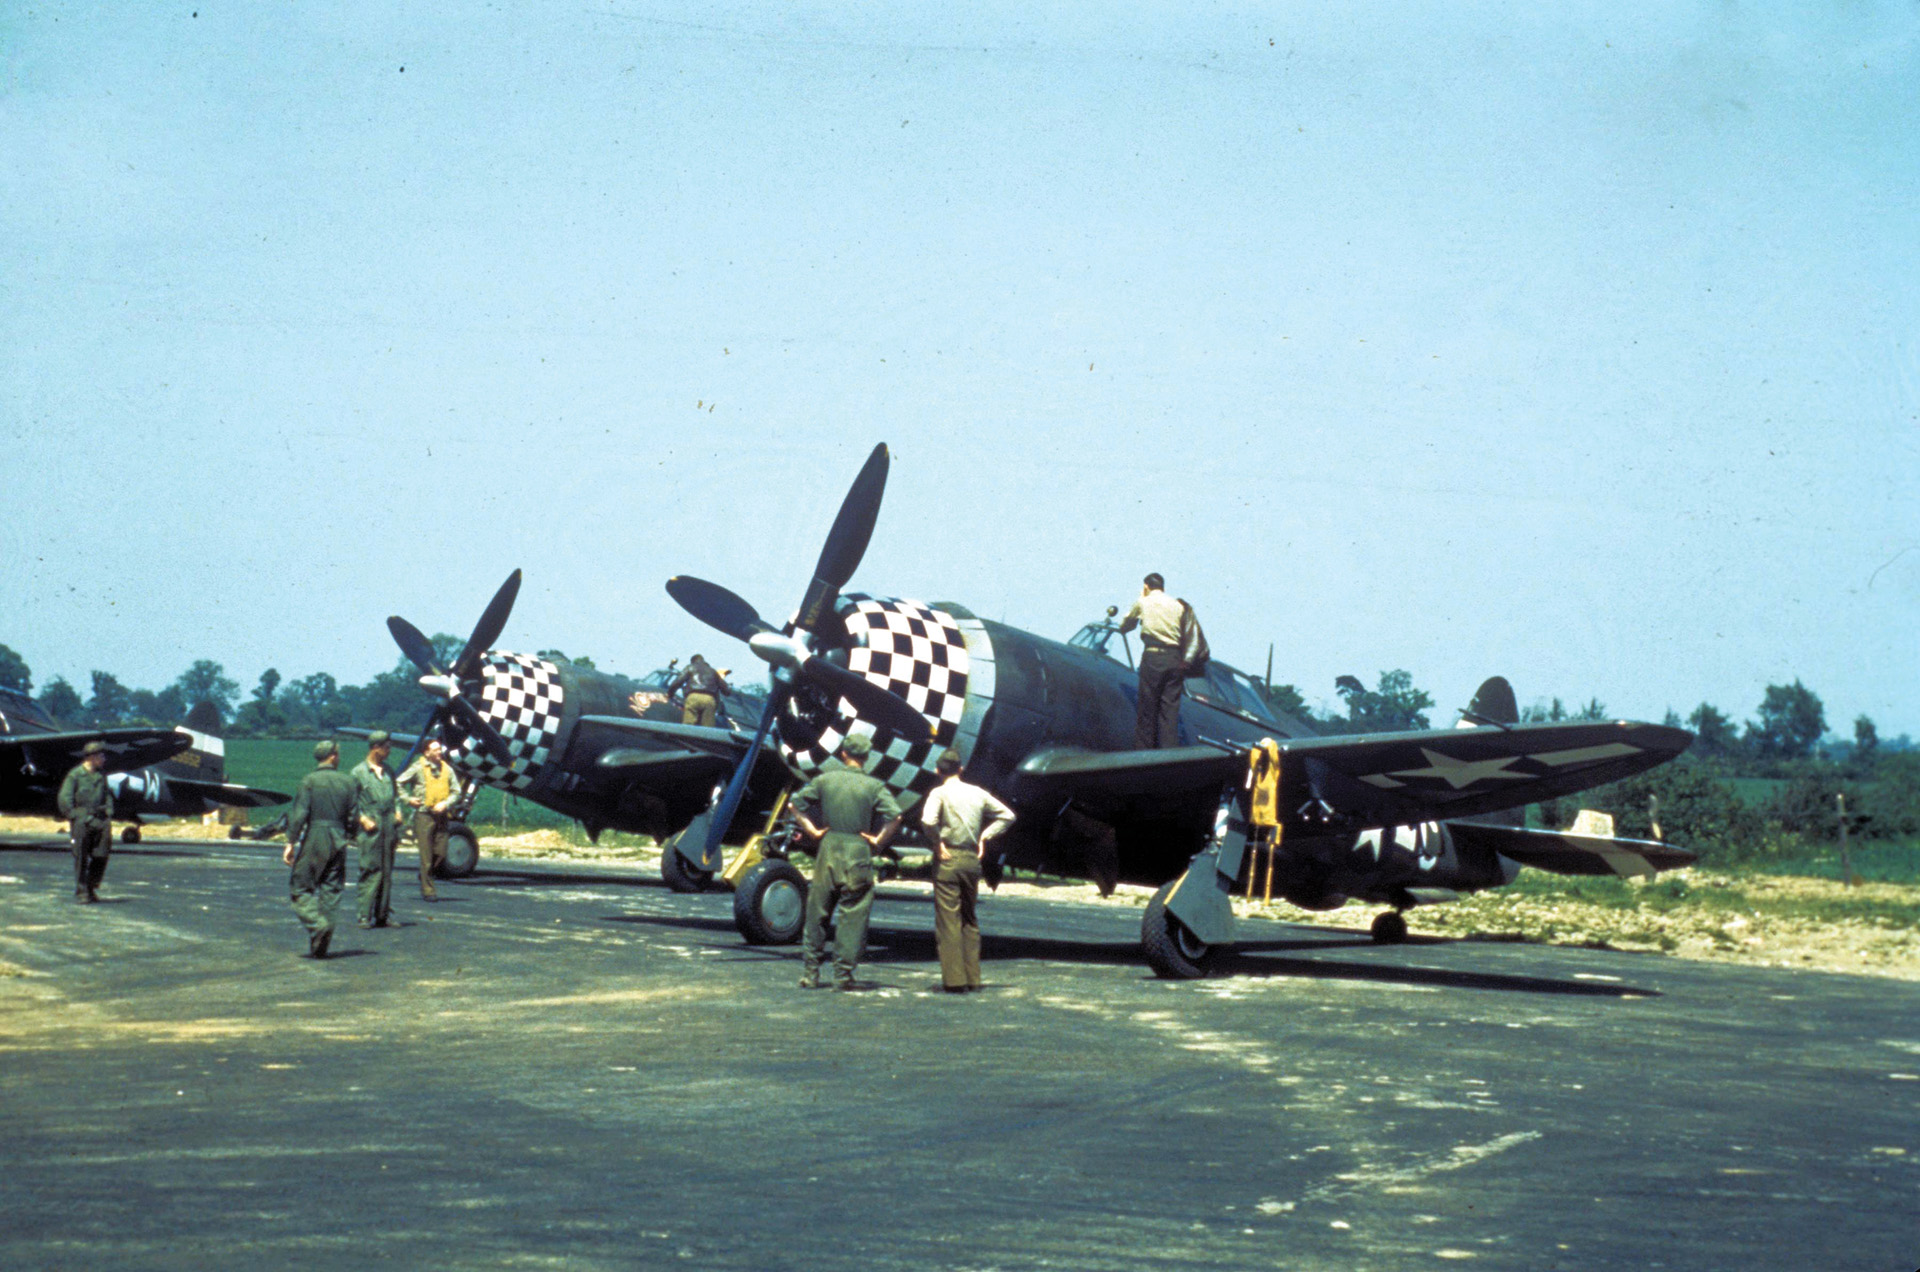 Ground crewmen prepare the P-47 Thunderbolt fighters of the 78th Fighter Group at Duxford, United Kingdom, where the group was based in 1944. 